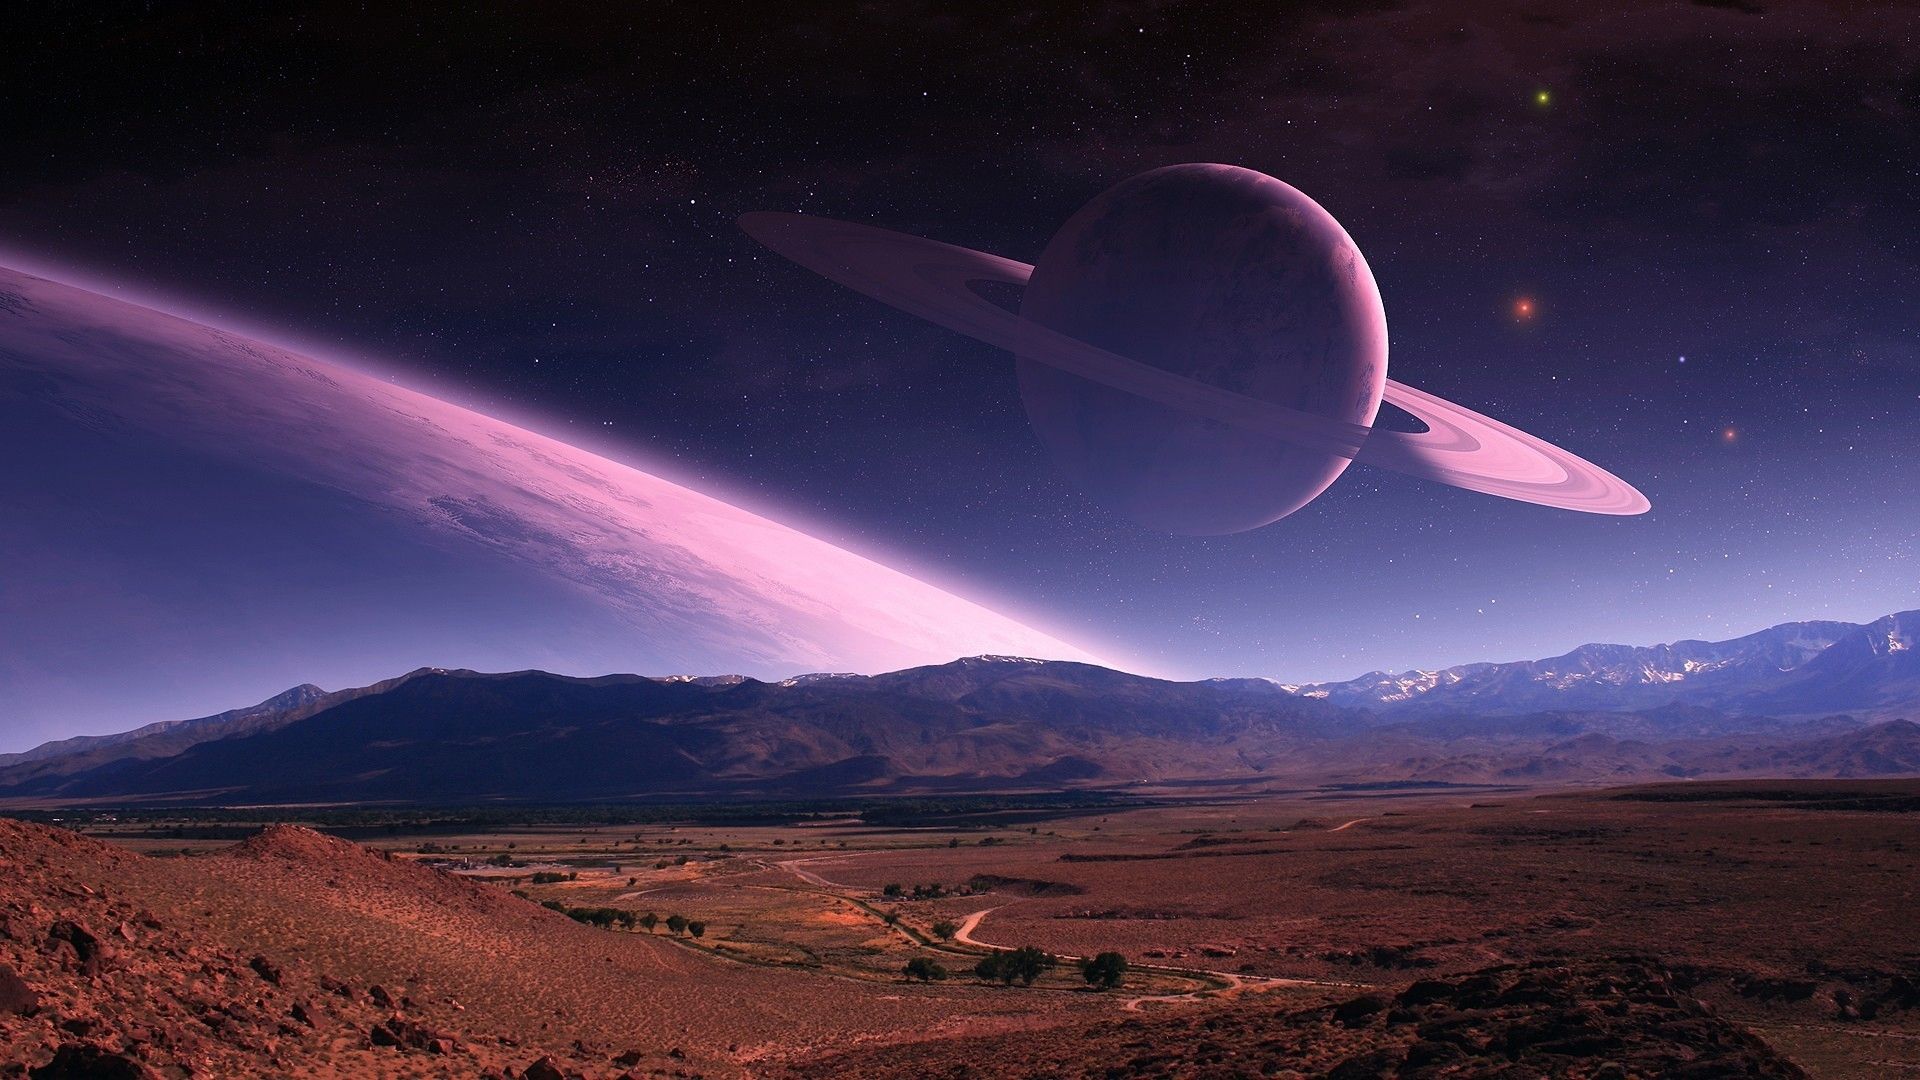 Space Galaxy Nature Landscape Sky Stars Planet Planetary Rings Digital Art Space Art 1920x1080